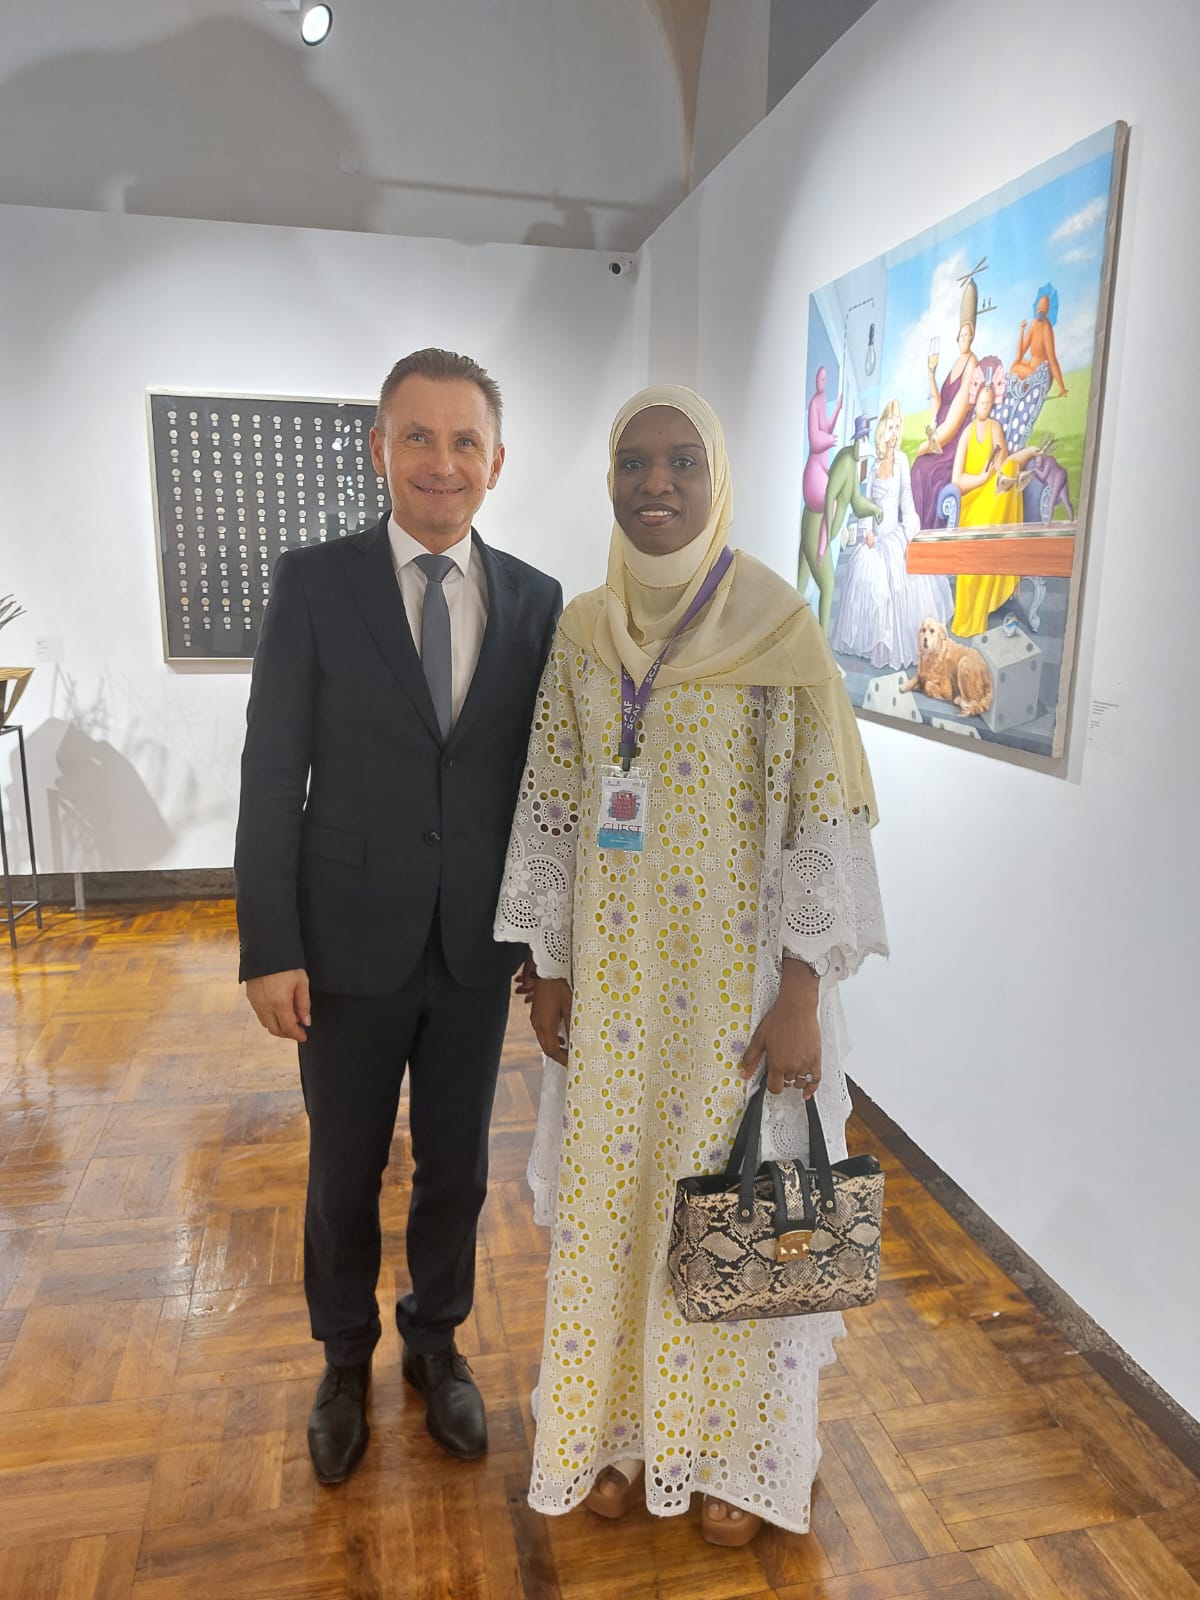 H.E Dr. Safiya Ahmad Nuhu participated in the opening ceremony of SCAF 2023 – Sibiu Contemporary Art Festival